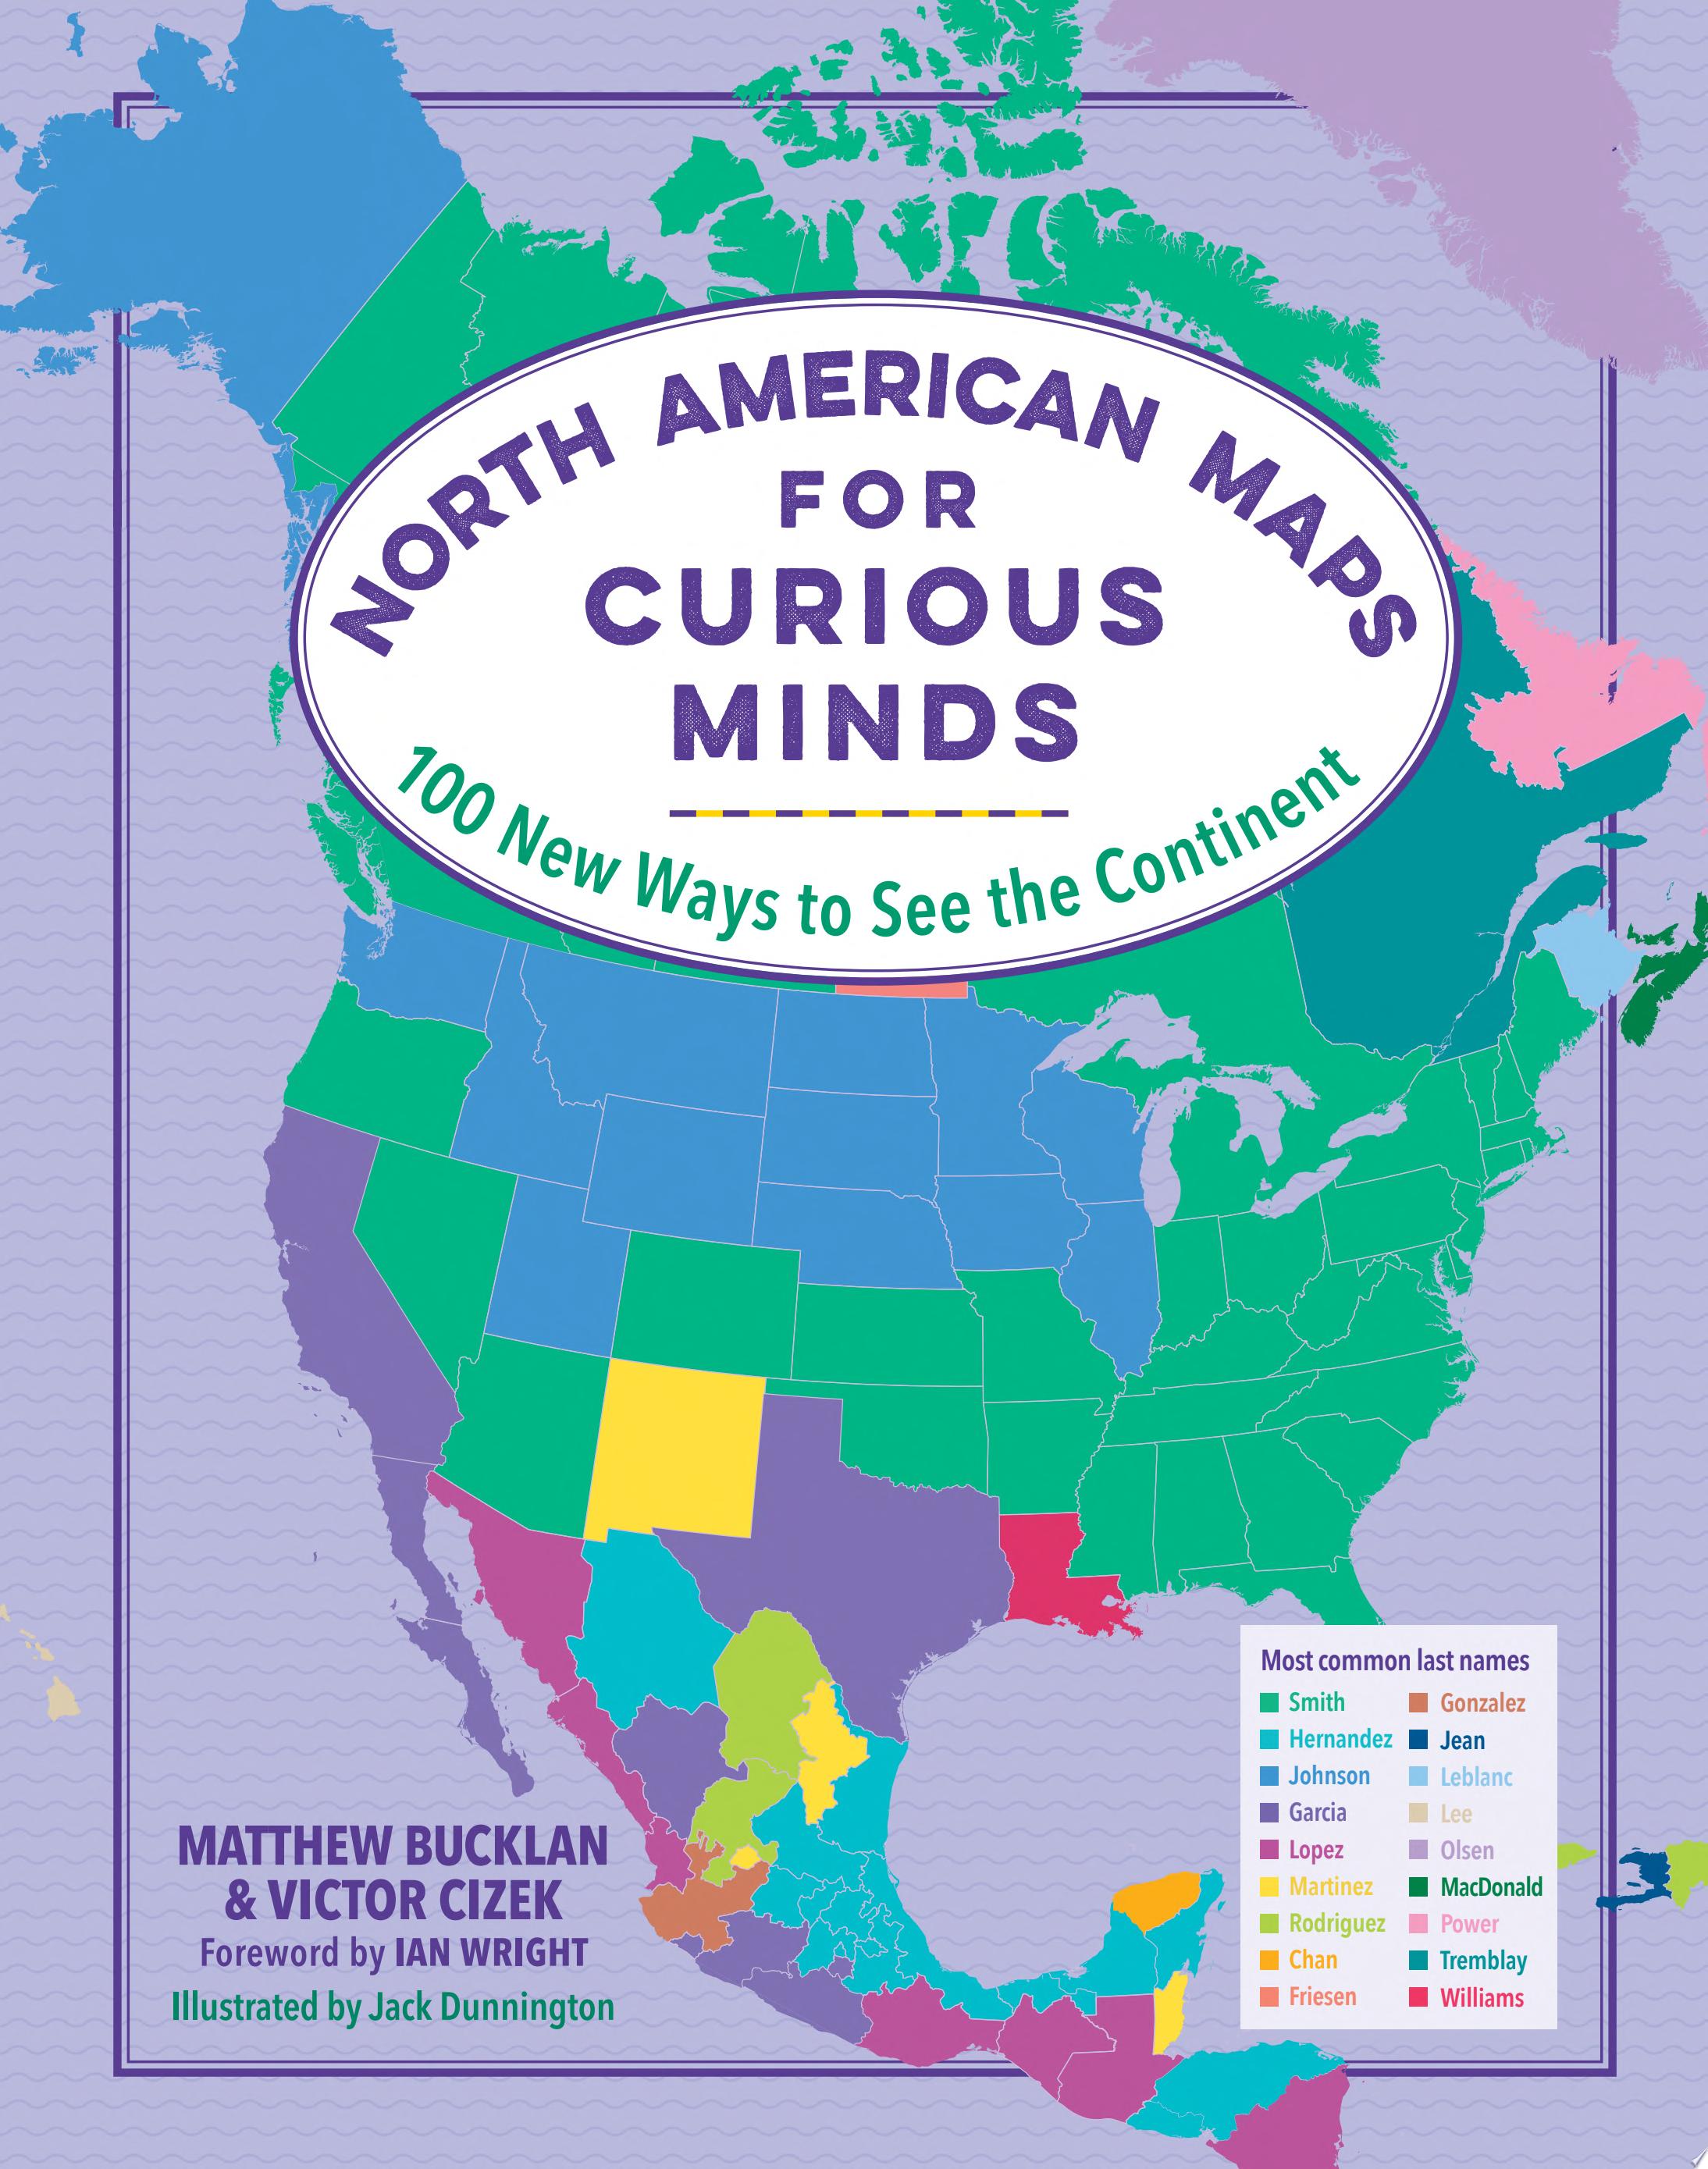 Image for "North American Maps for Curious Minds"